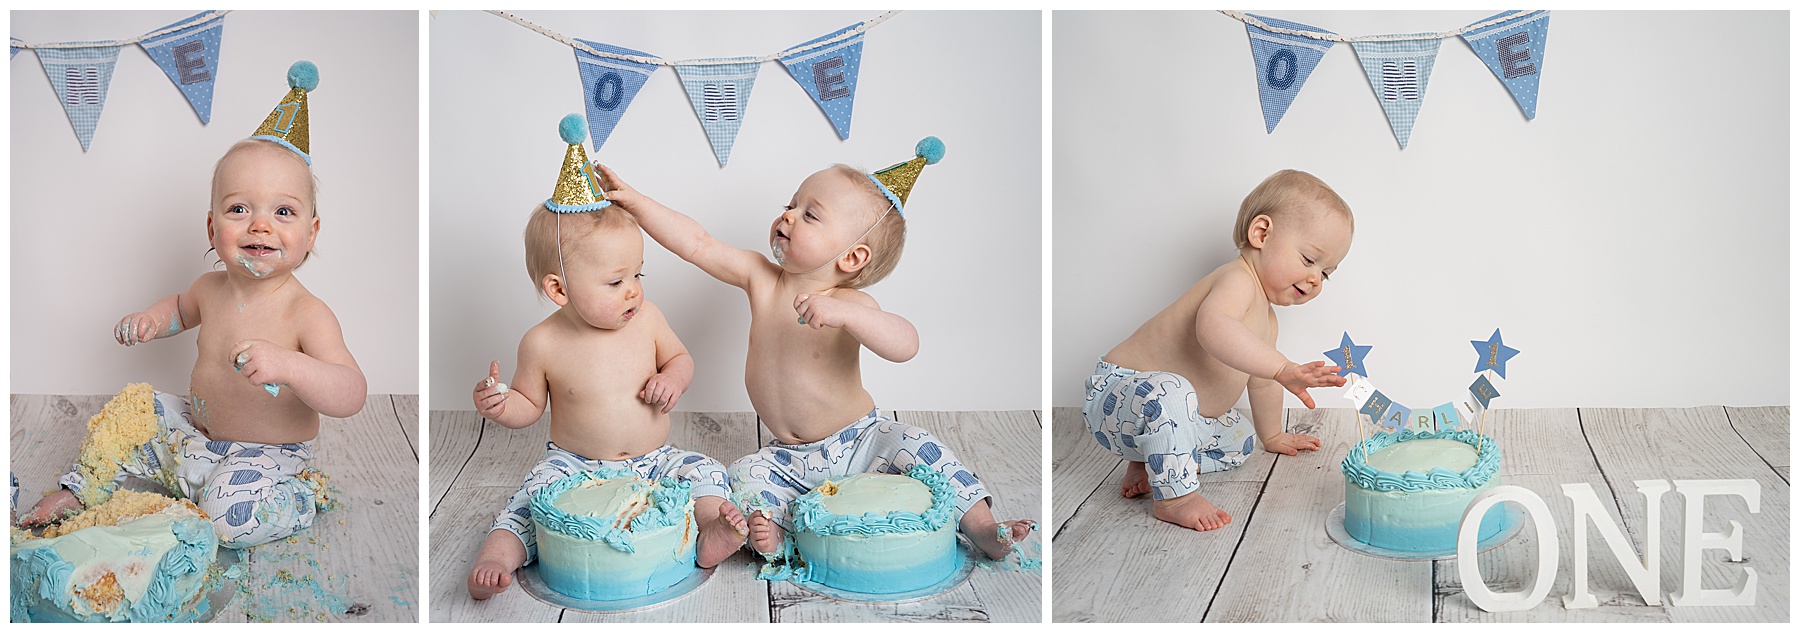 Twin cake smash with Dorset baby photographer and a blue cake